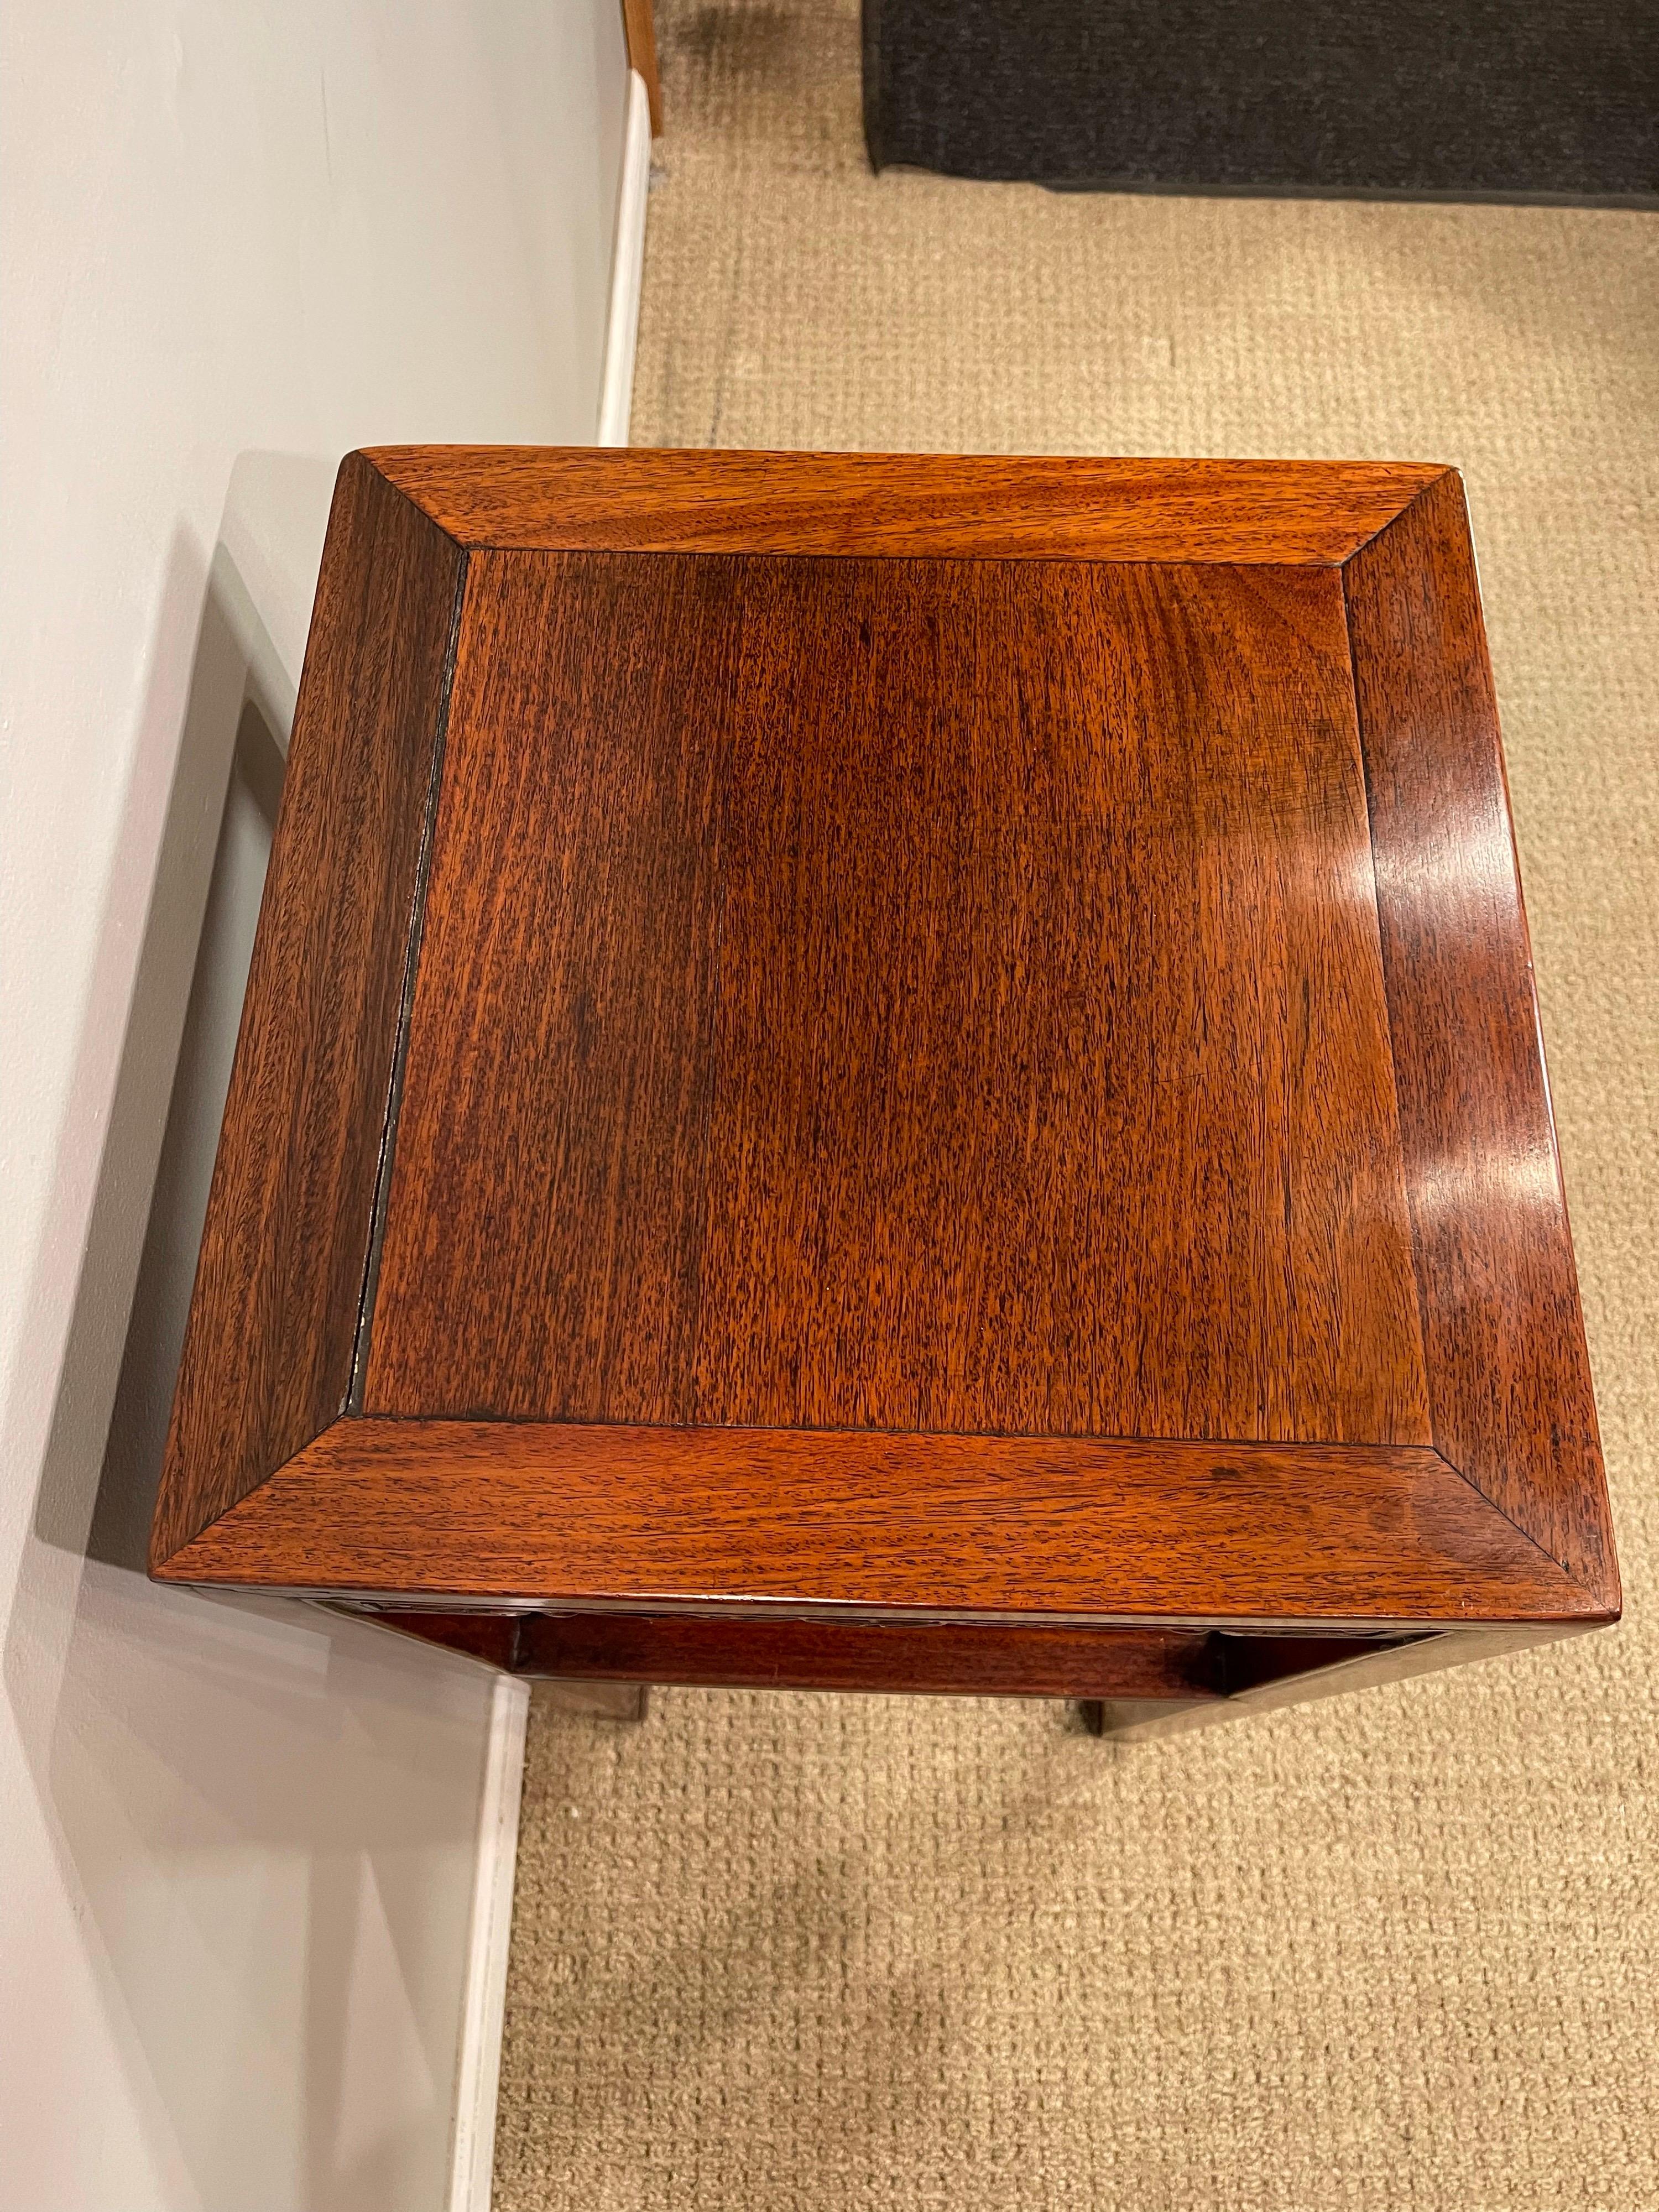 Chinese Hardwood 'Hungmu' Tea Table, Late 19th Century / Early 20th Century 2